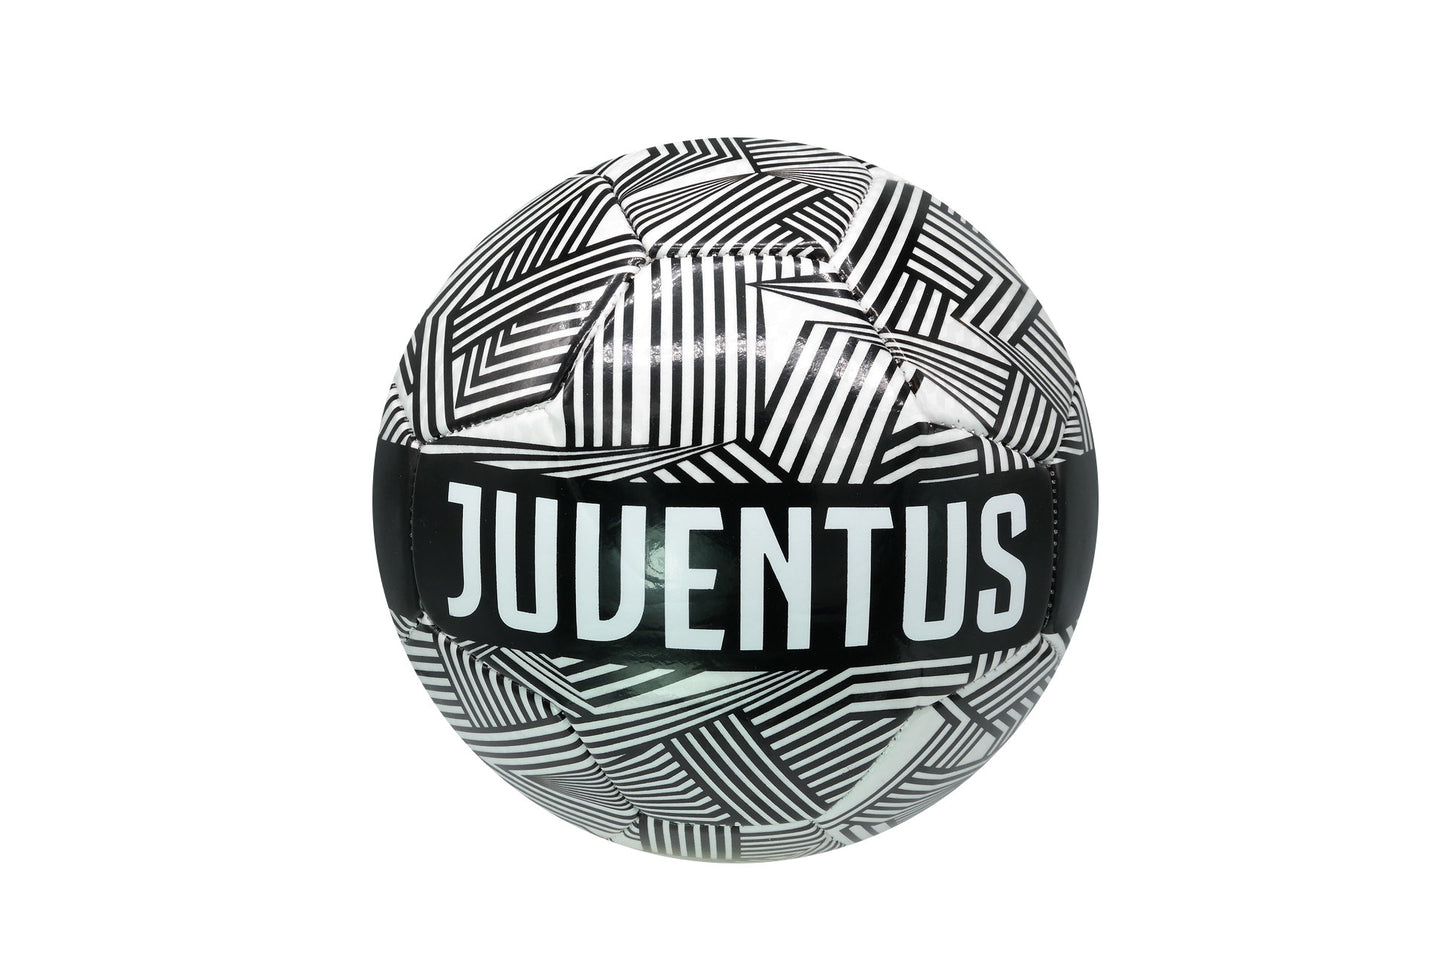 FIFA Juventus Officially Licensed Team Soccer Ball UEFA Champions League Soccer Juventus, Team Color, Size 5